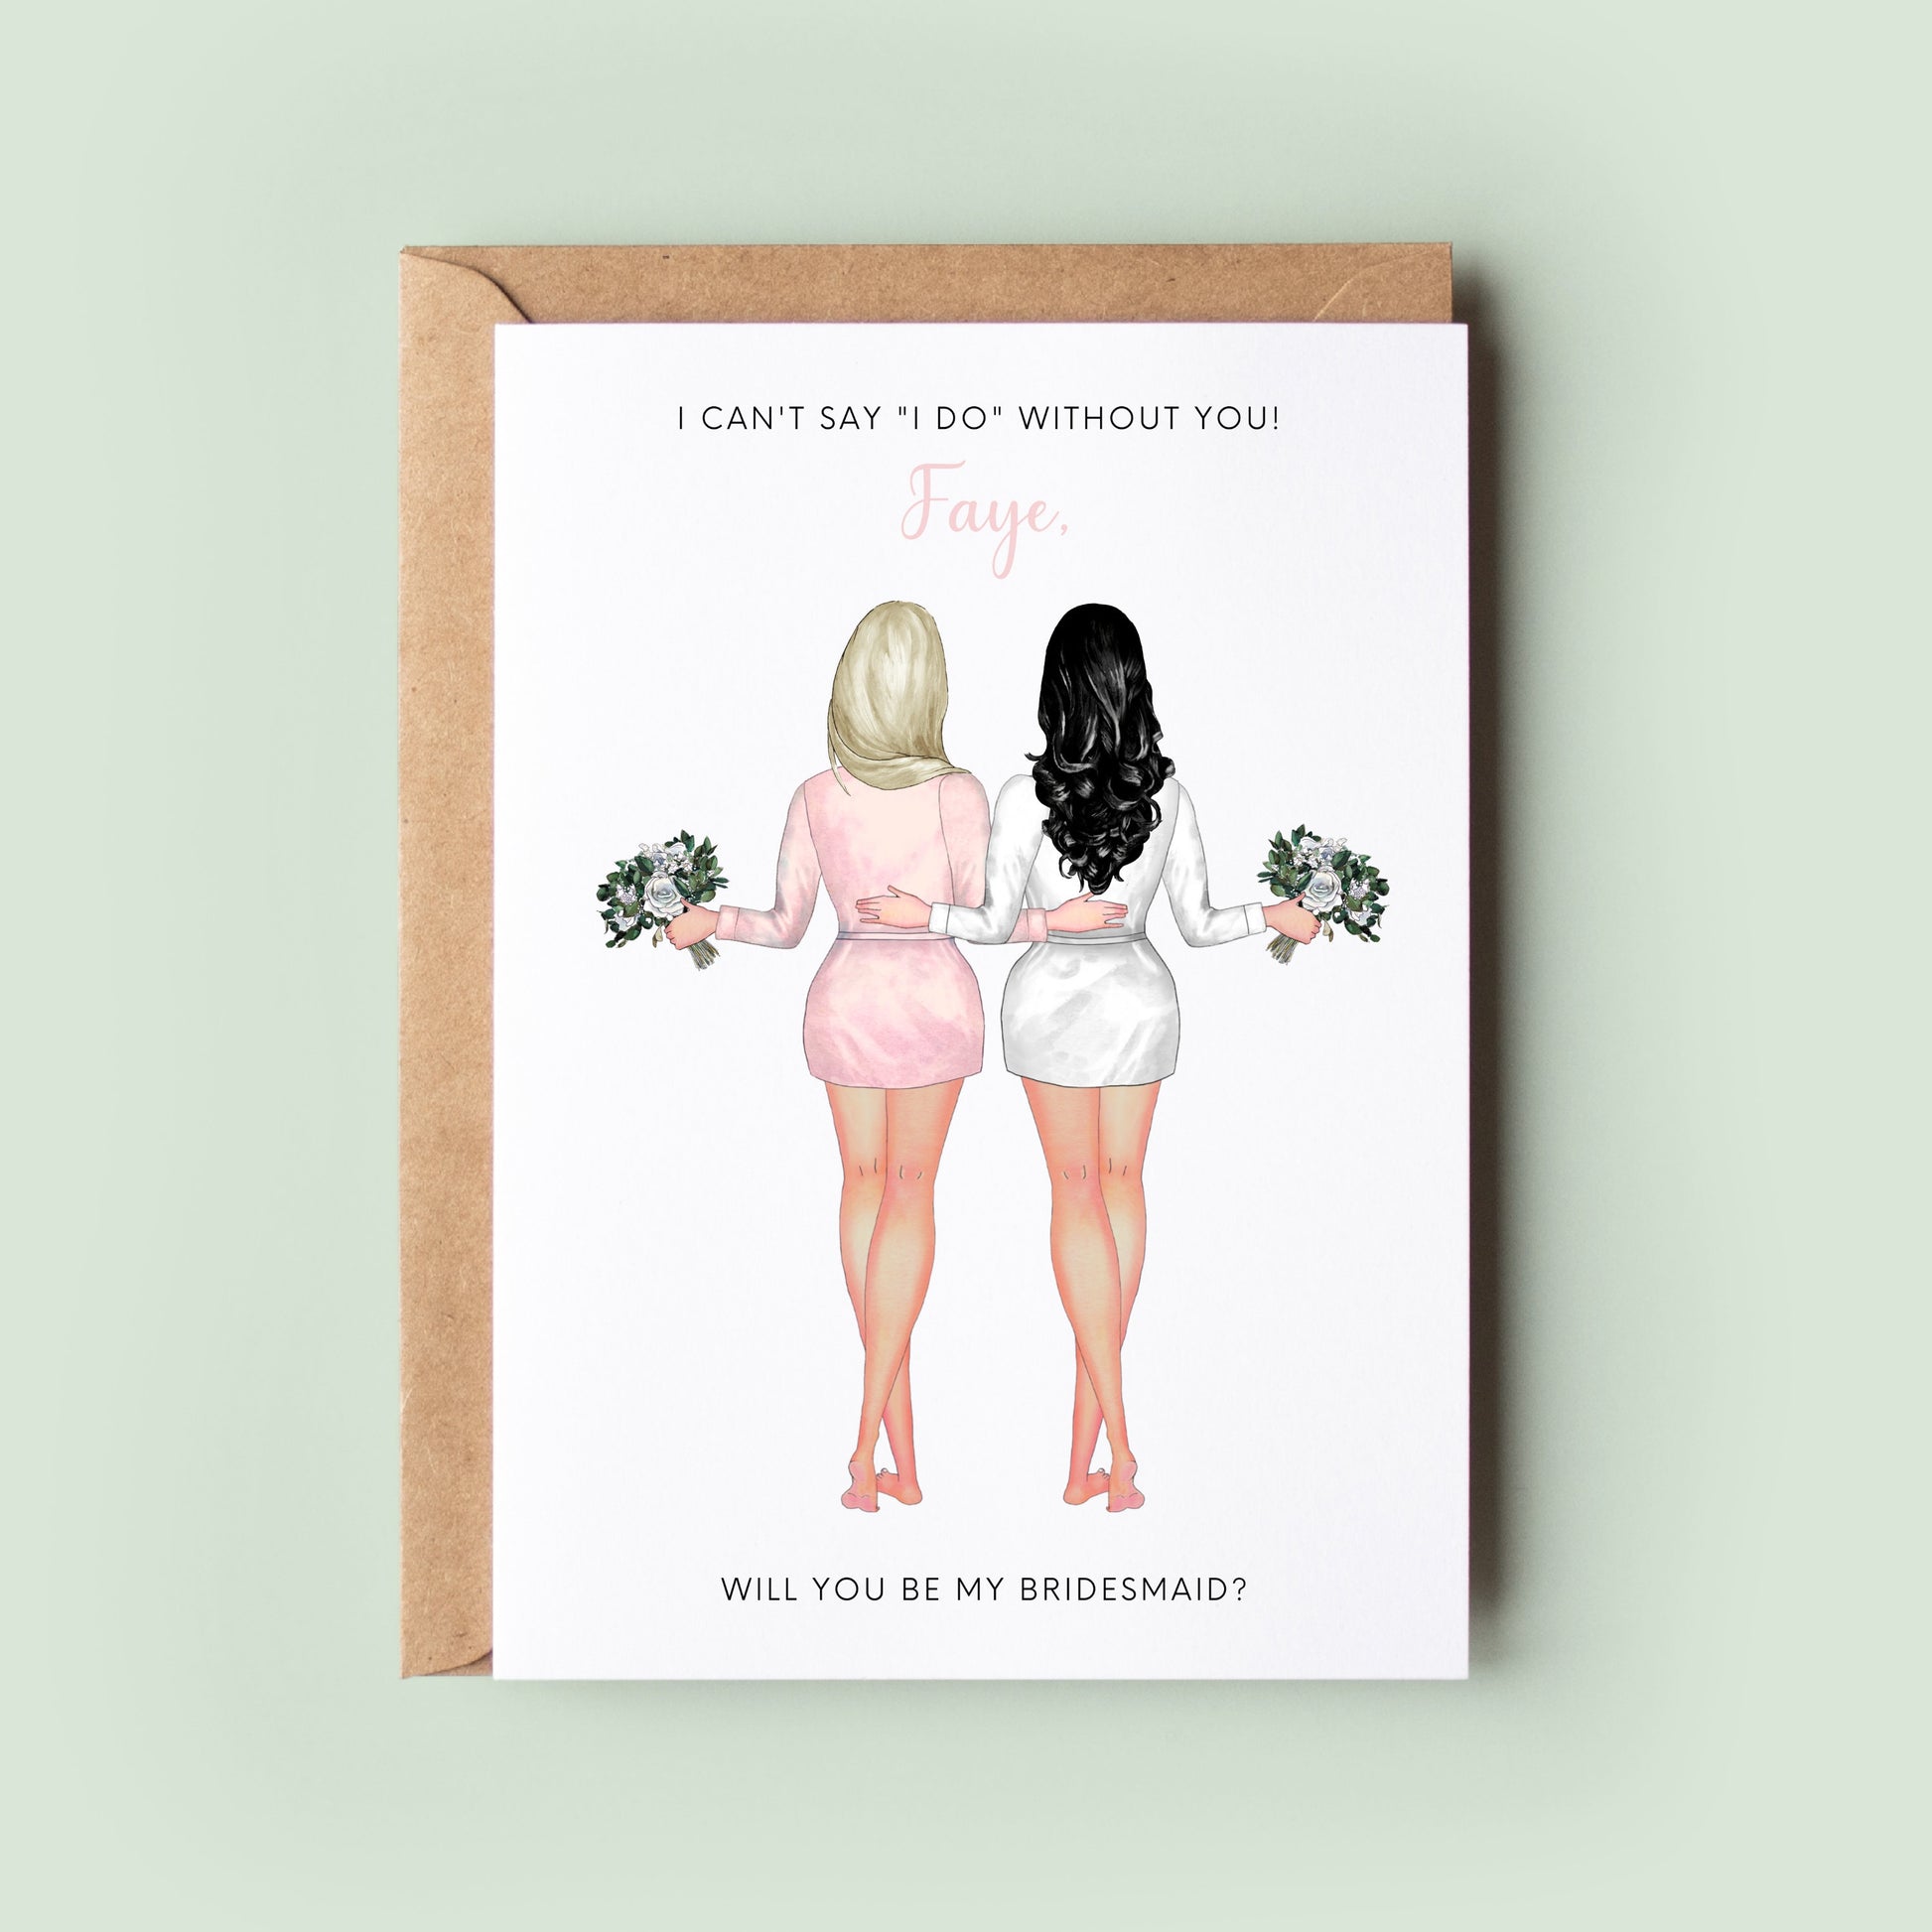 A customisable Will You Be My Bridesmaid card with options to personalise the robe colour, hairstyle, skin tone, accessories, and text. Make your bridesmaid proposal as unique as your friendship.